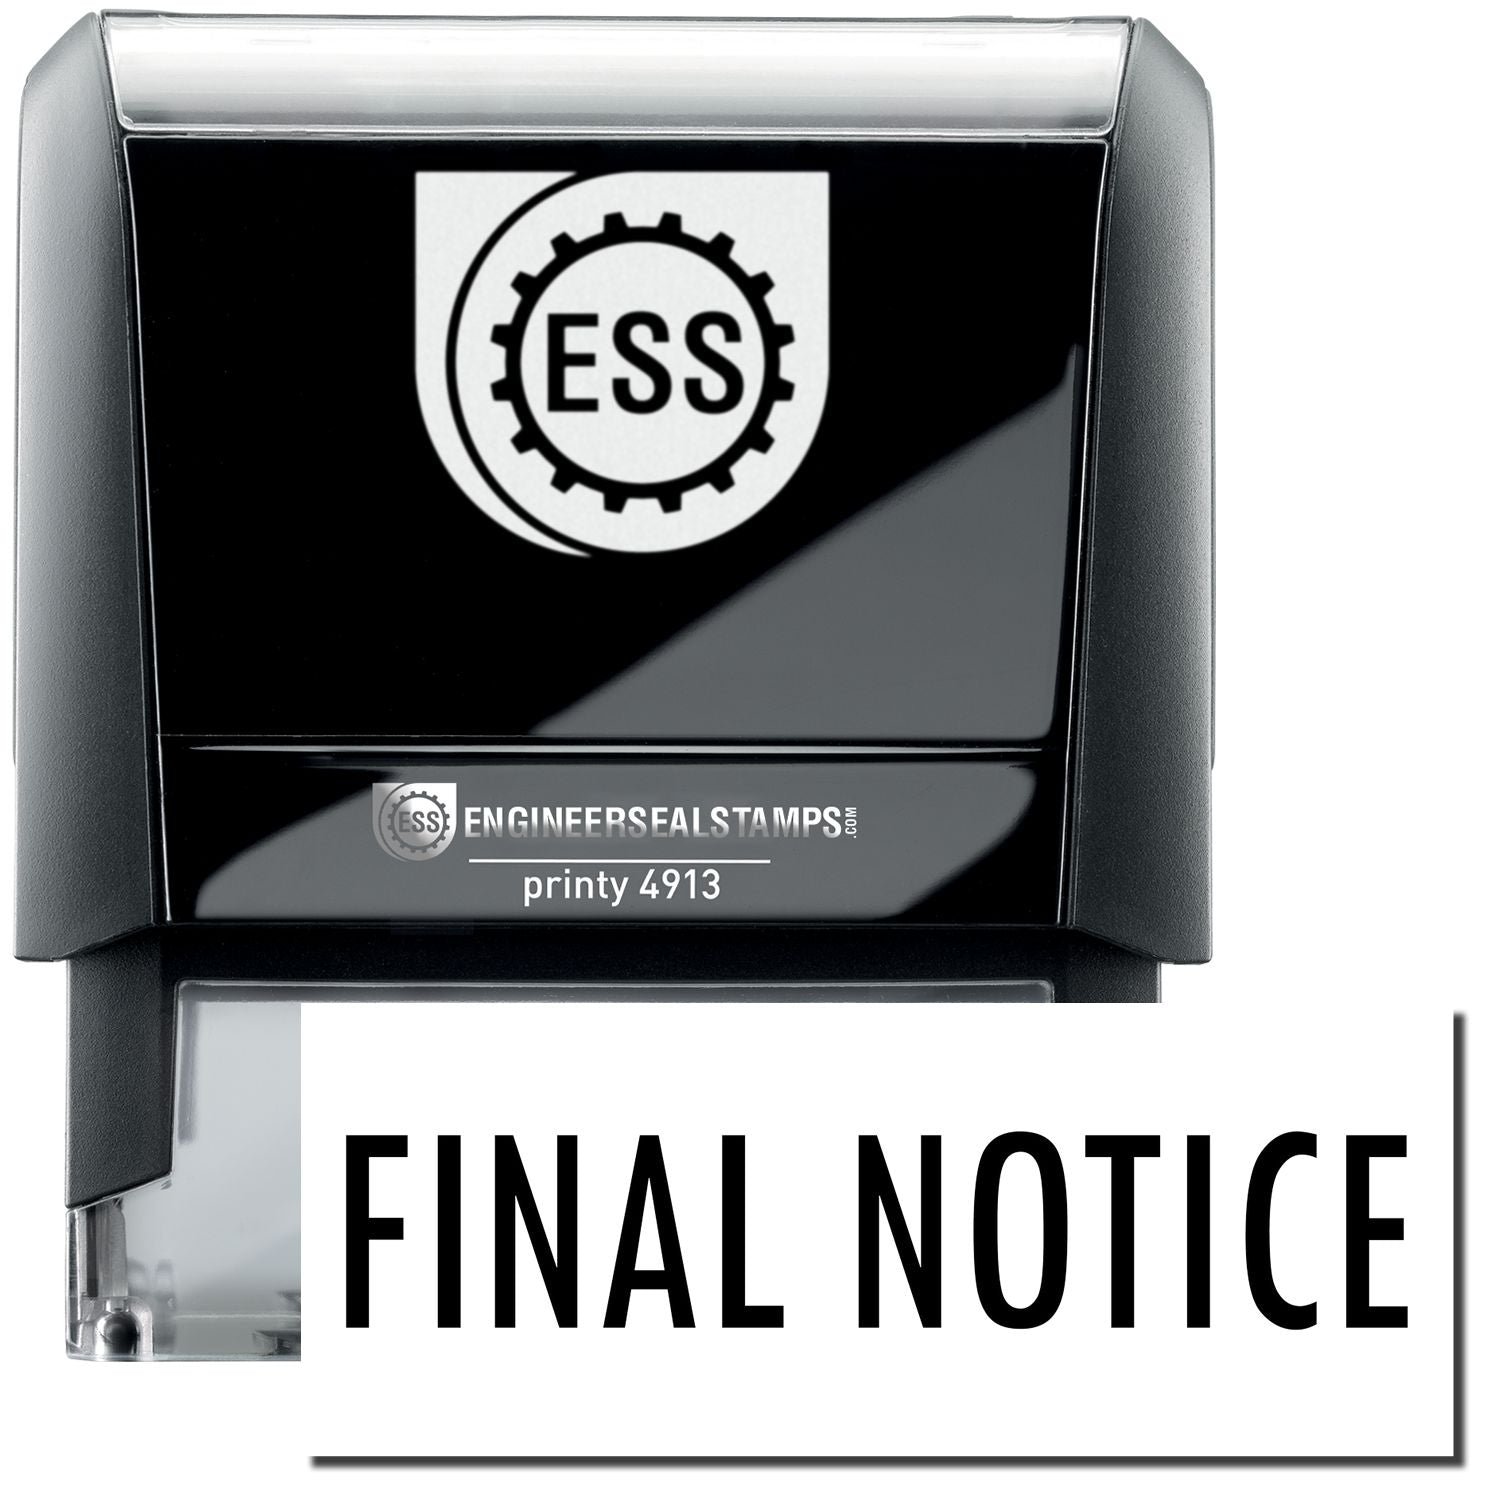 A self-inking stamp with a stamped image showing how the text "FINAL NOTICE" in a large bold font is displayed by it.